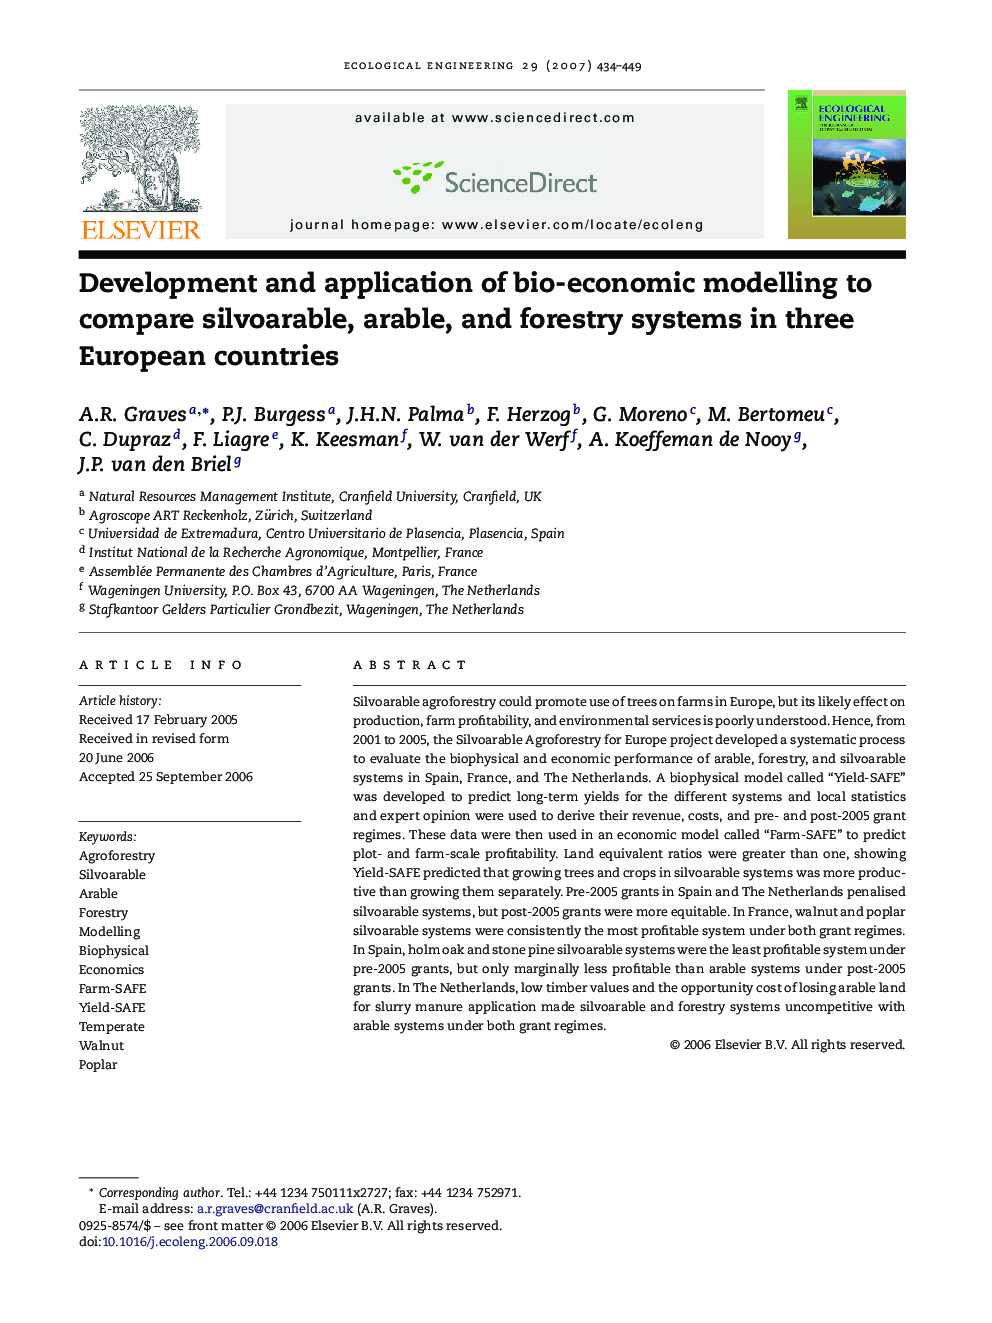 Development and application of bio-economic modelling to compare silvoarable, arable, and forestry systems in three European countries